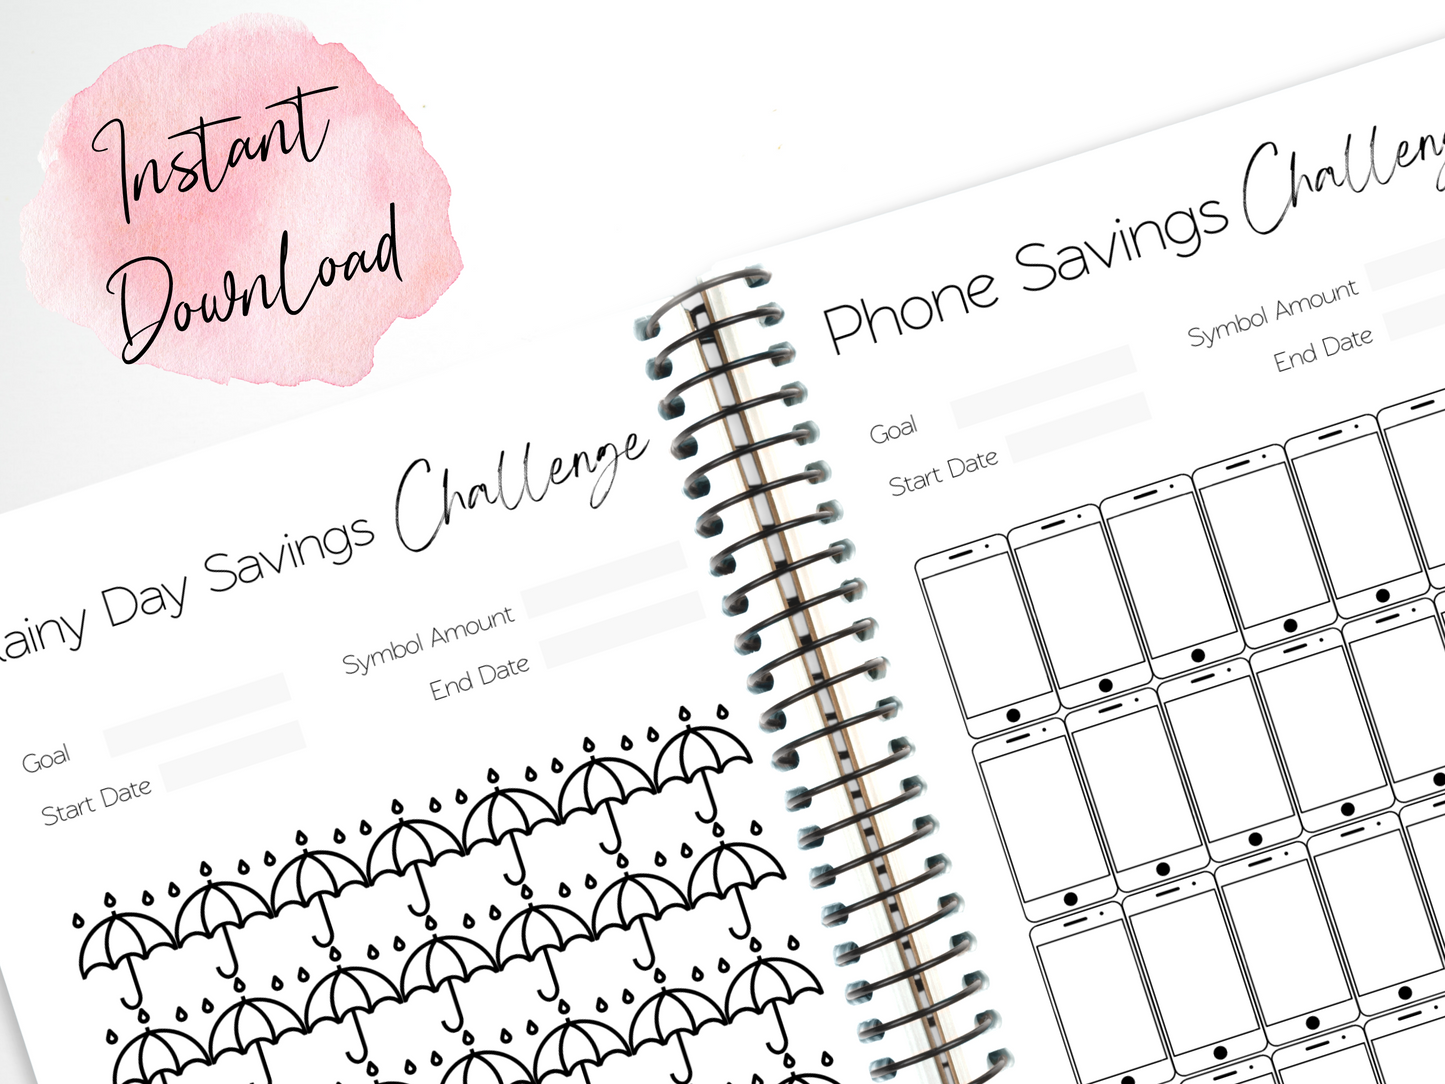 Sinking Funds Printable, Sinking Funds Challenge, Sinking Funds Tracker Printable, Savings Challenge Bundle A6 Savings Challenge Bundles Set